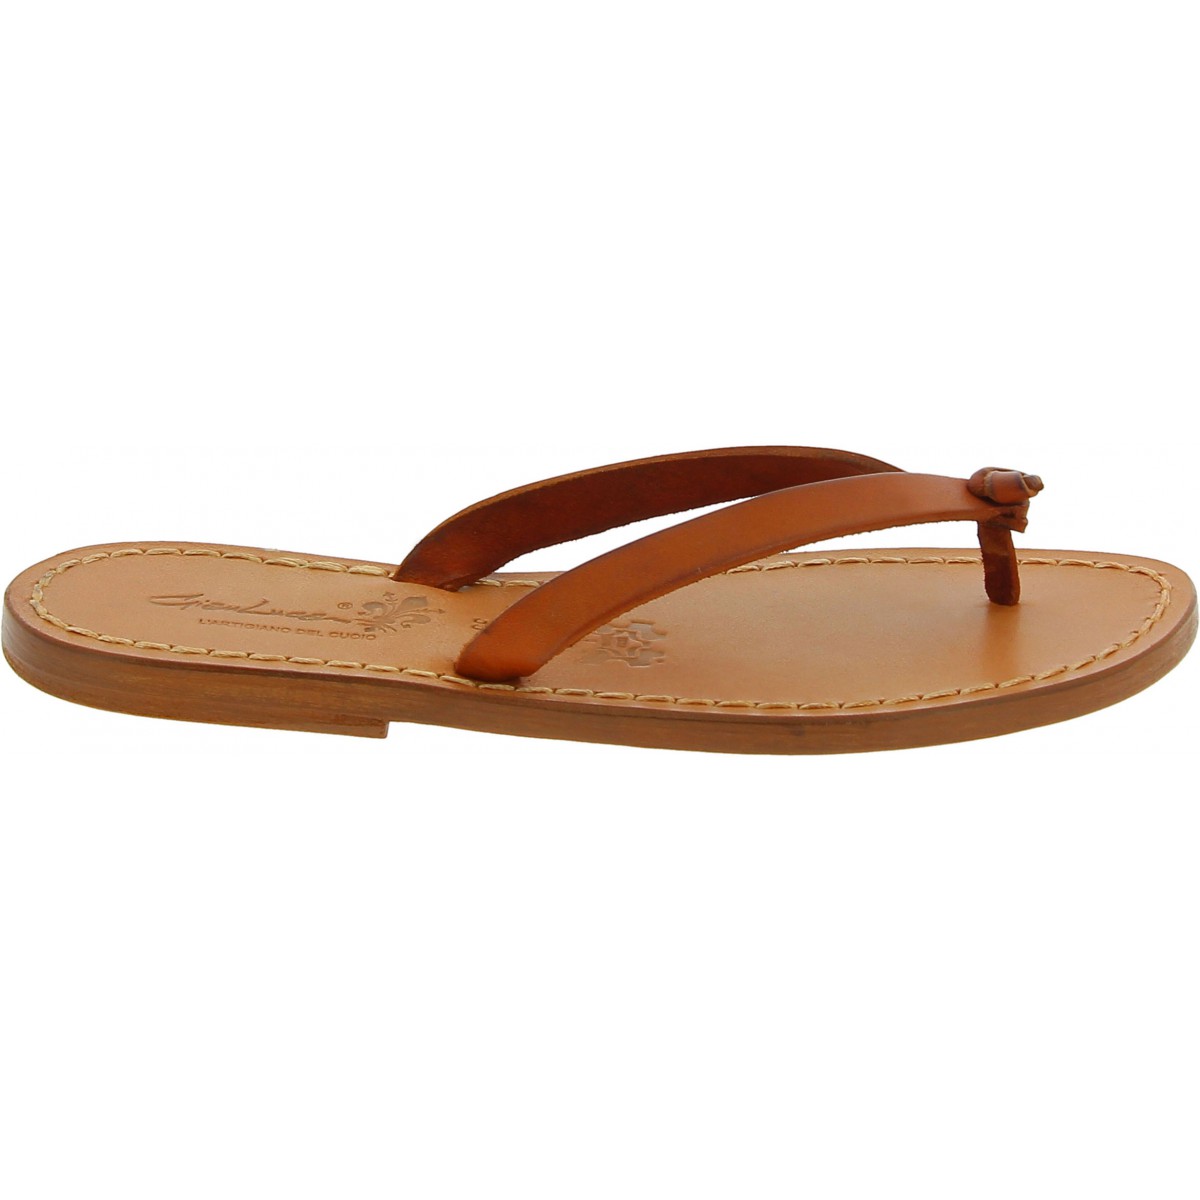 Handmade women's thong slippers in tan leather | The